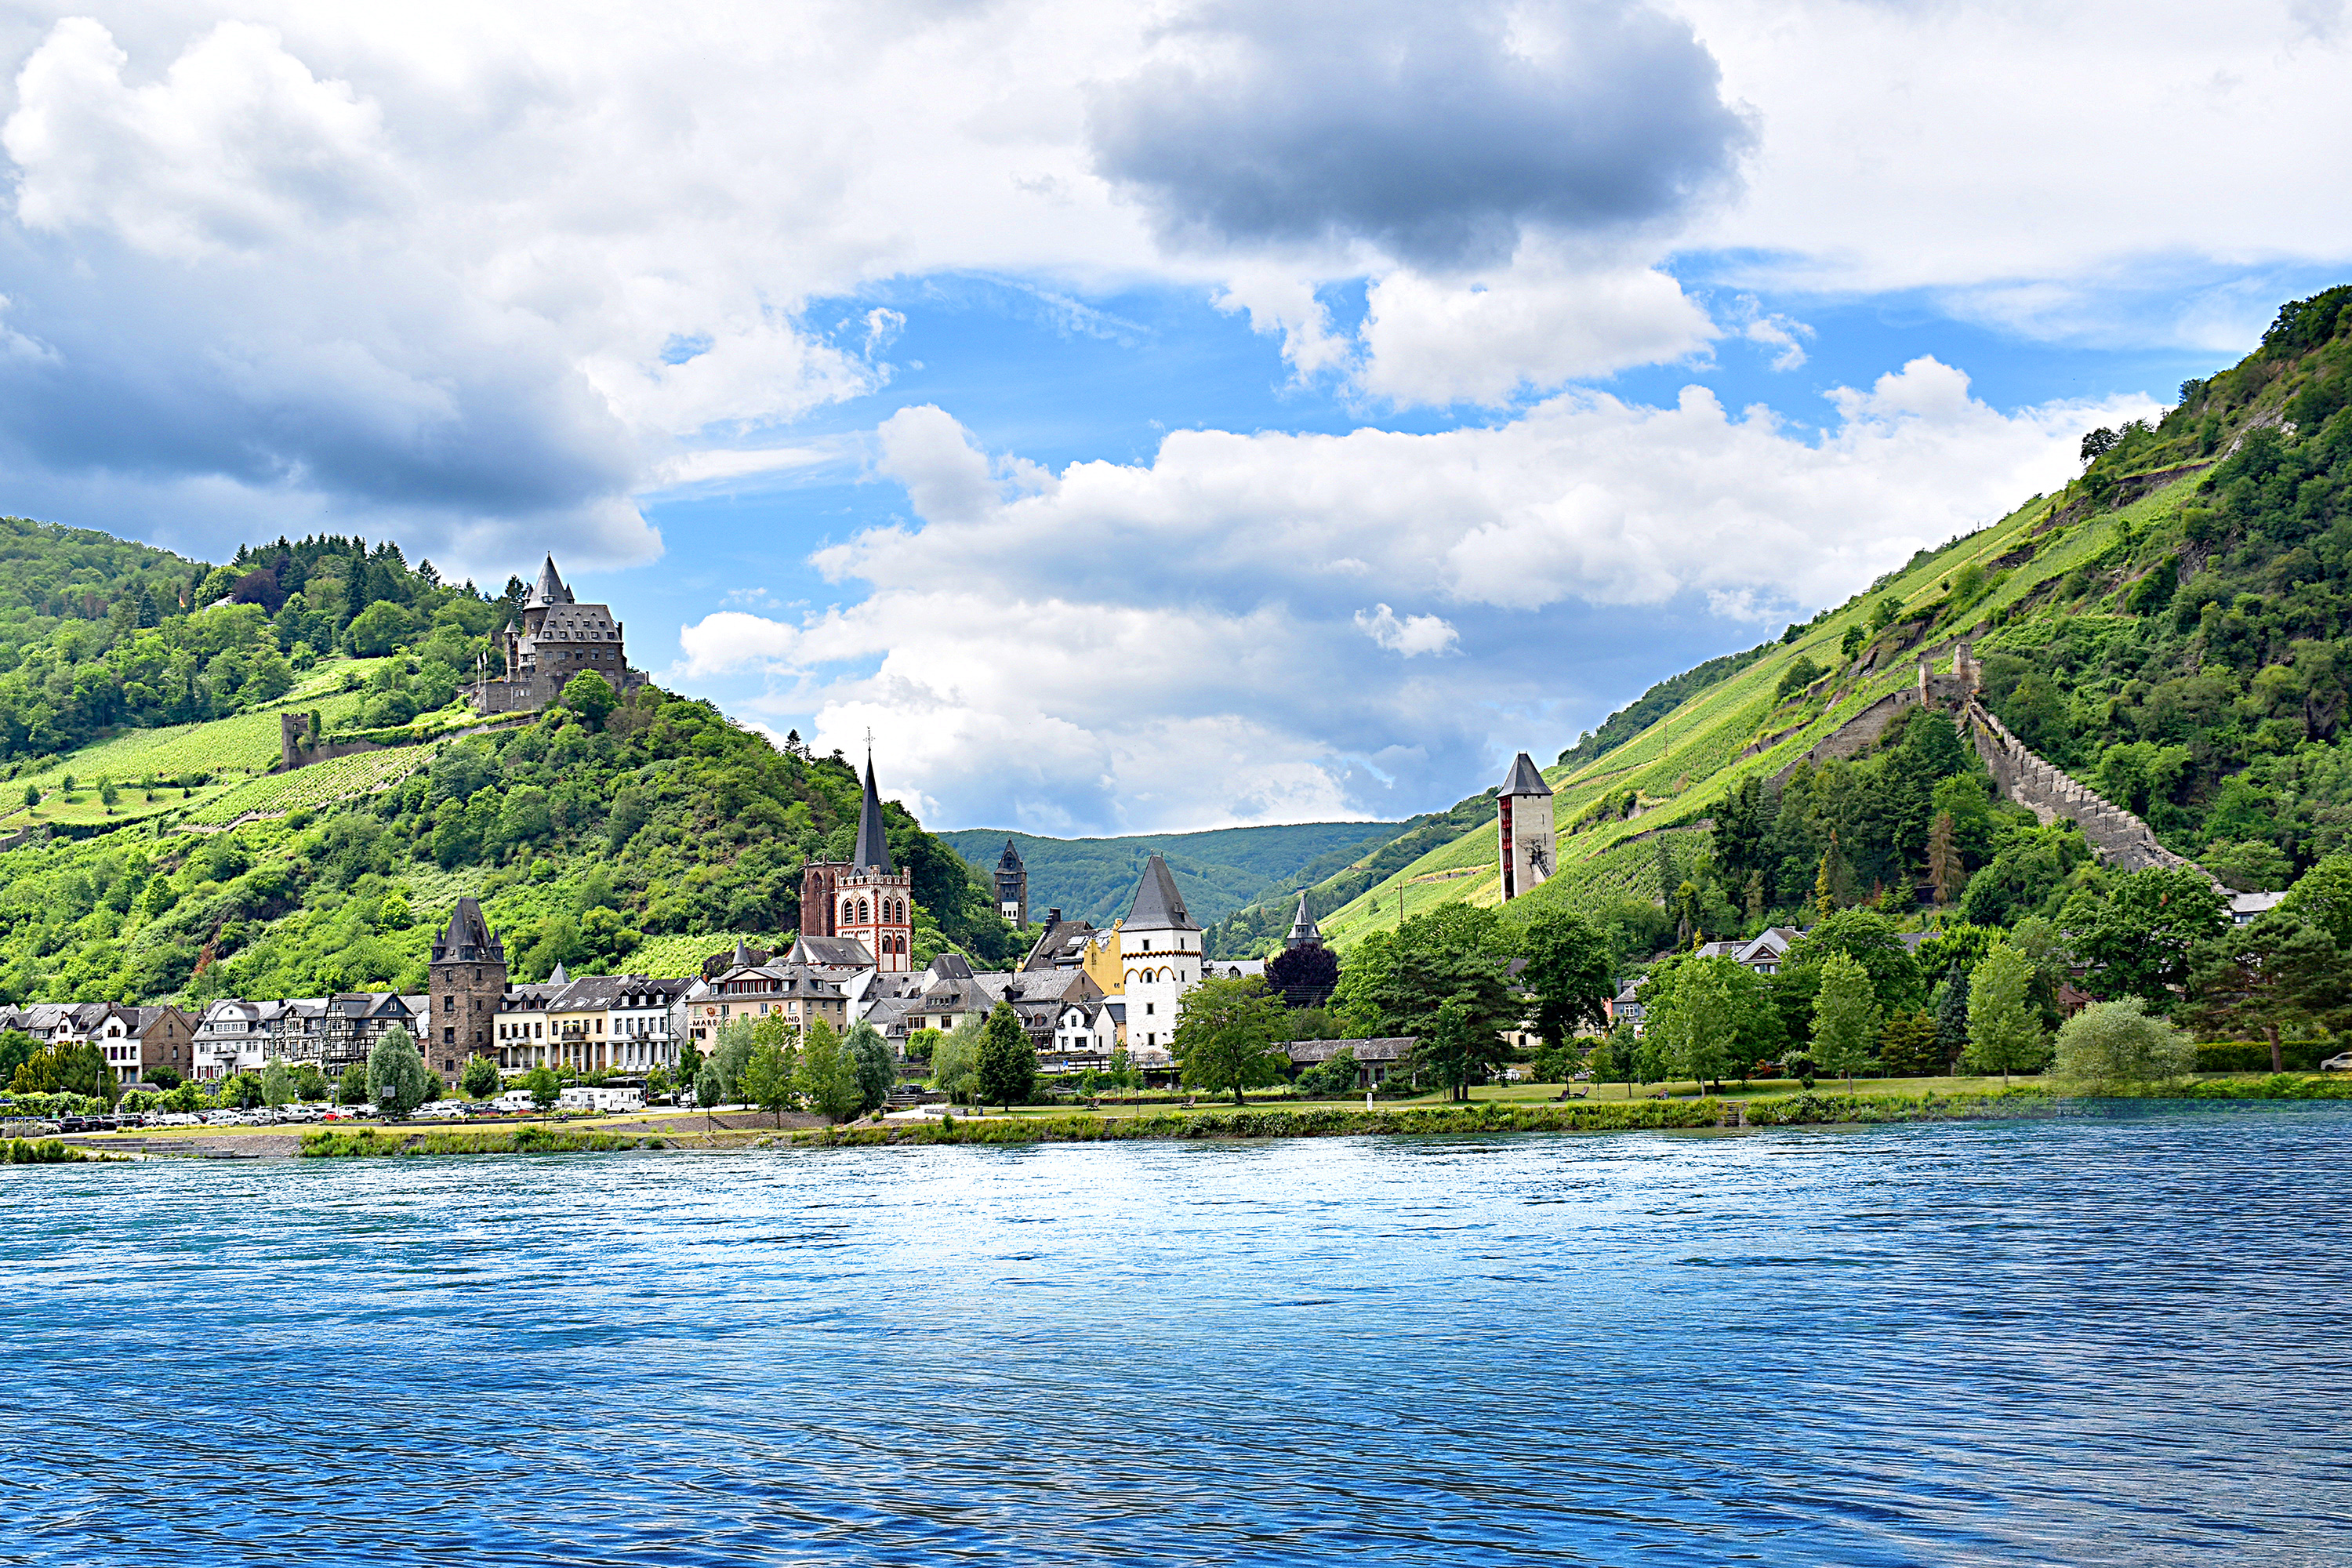 Castle along the Rhine River in Germany